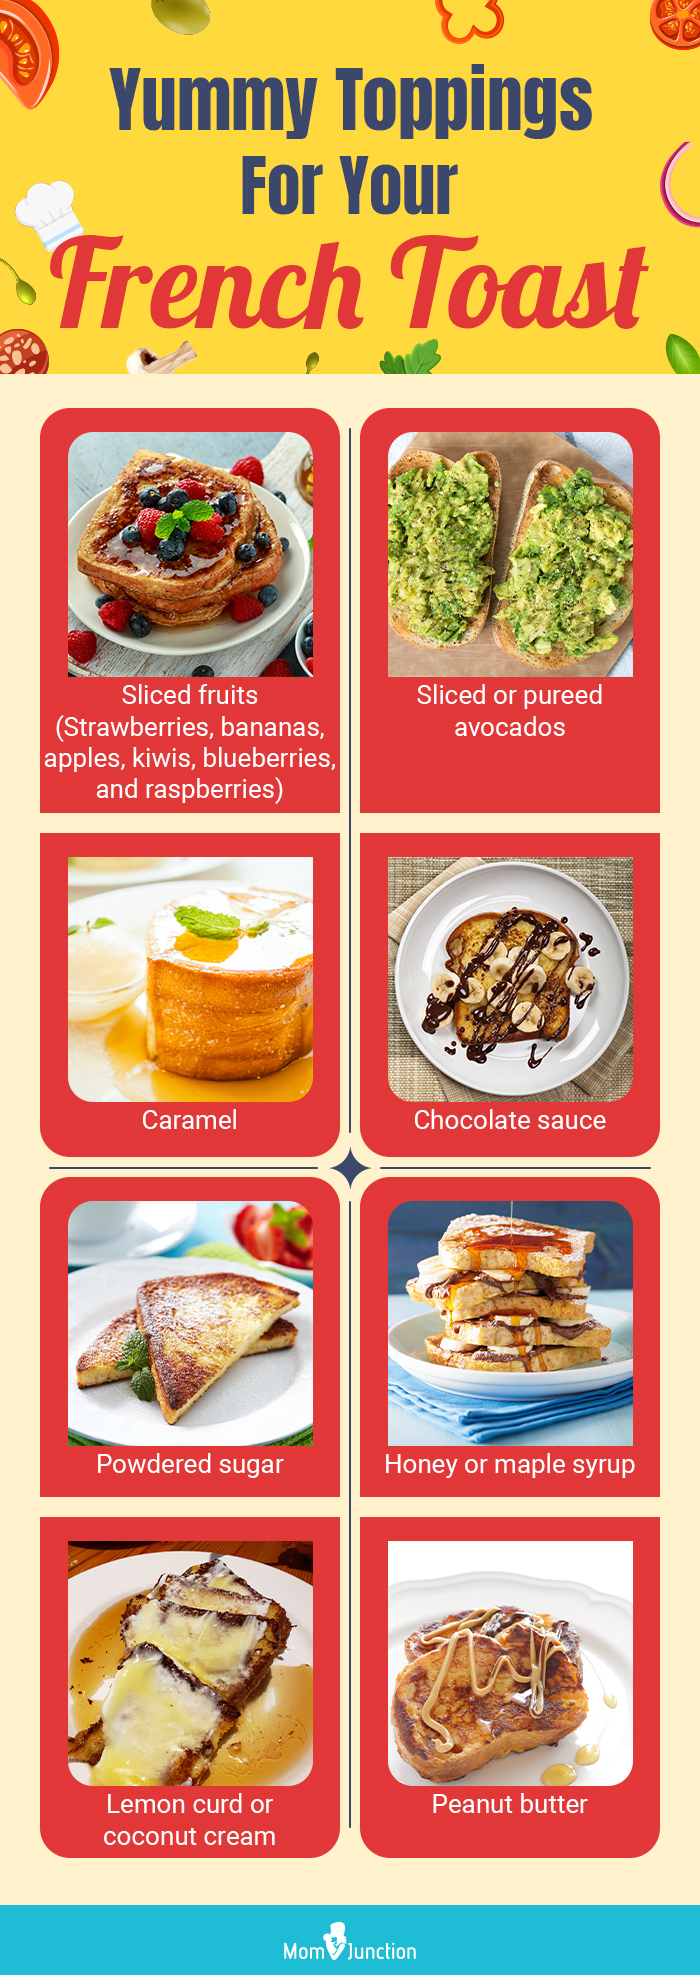 yummy toppings for your french toast (infographic)